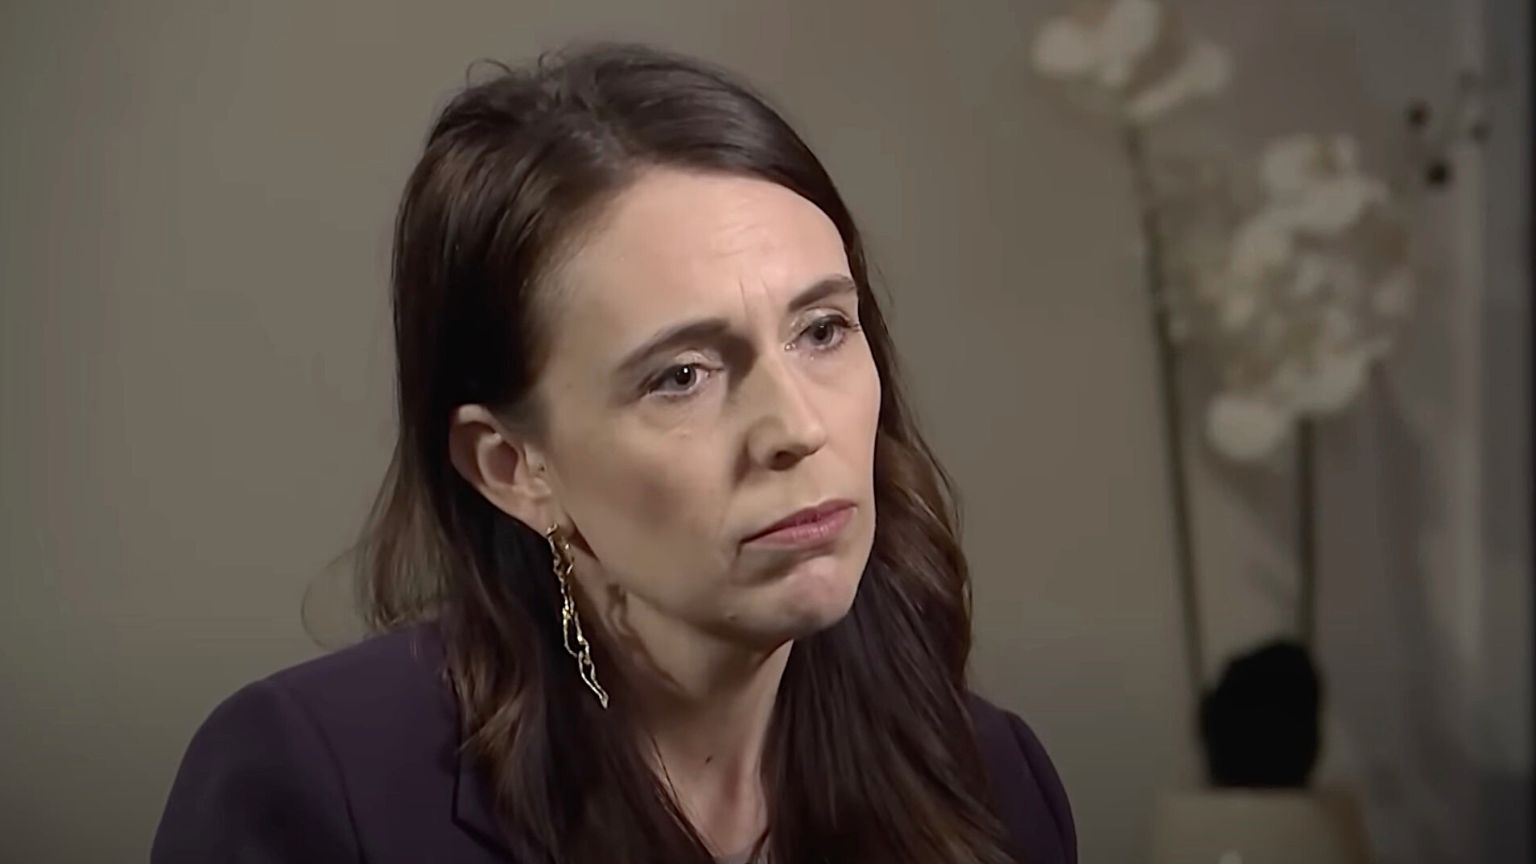 Jacinda Ardern is tipped for top internet censorship role